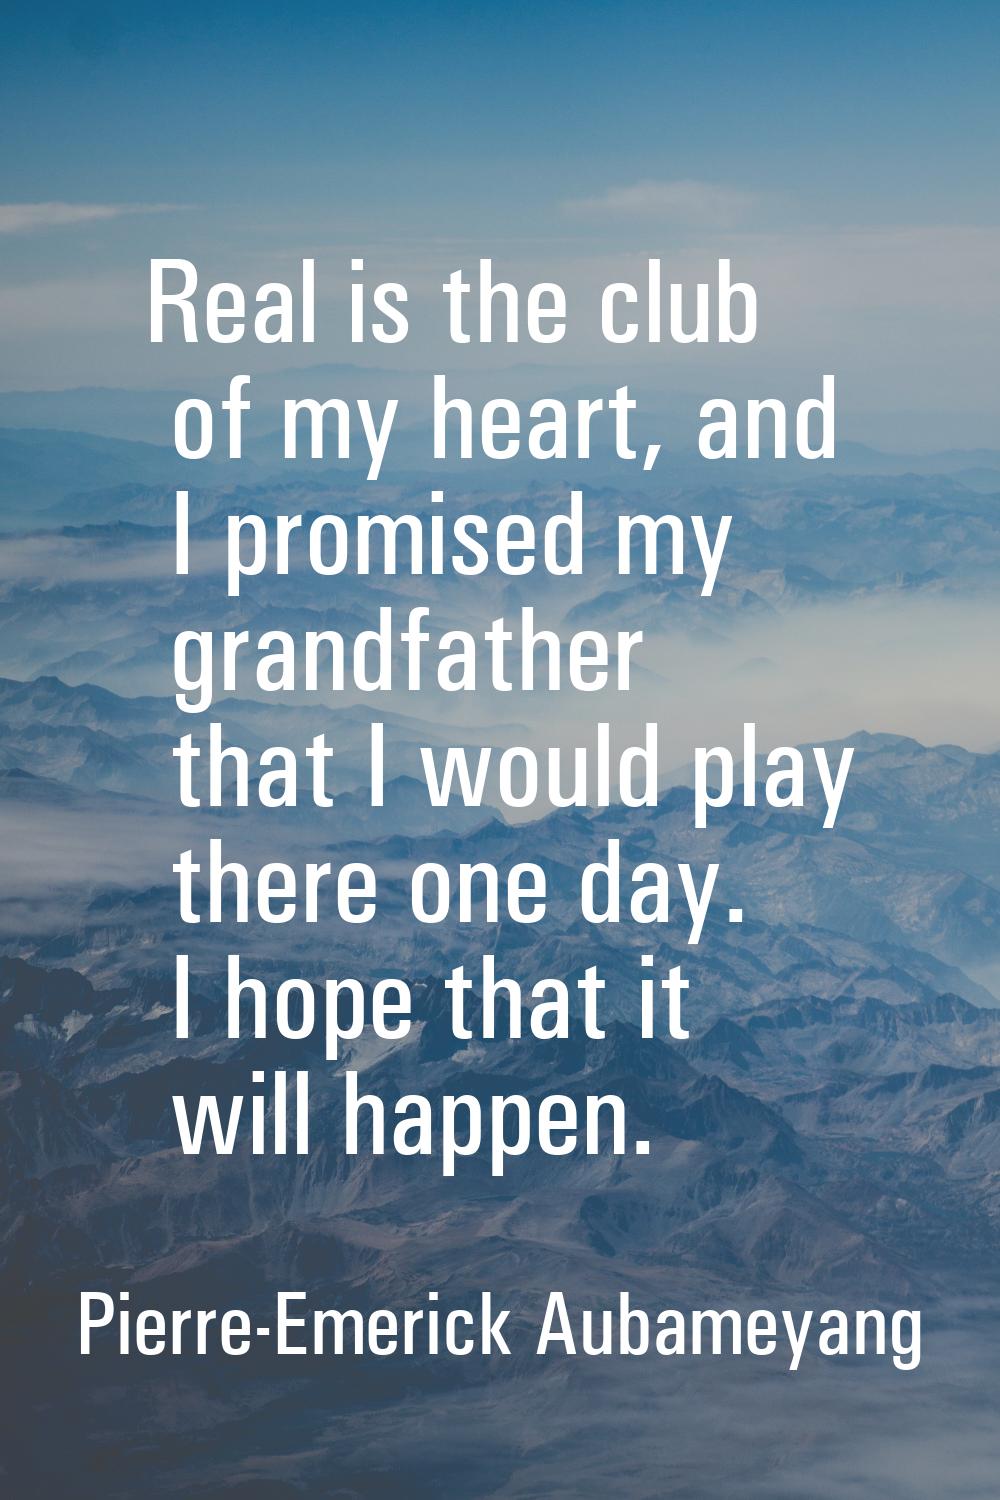 Real is the club of my heart, and I promised my grandfather that I would play there one day. I hope